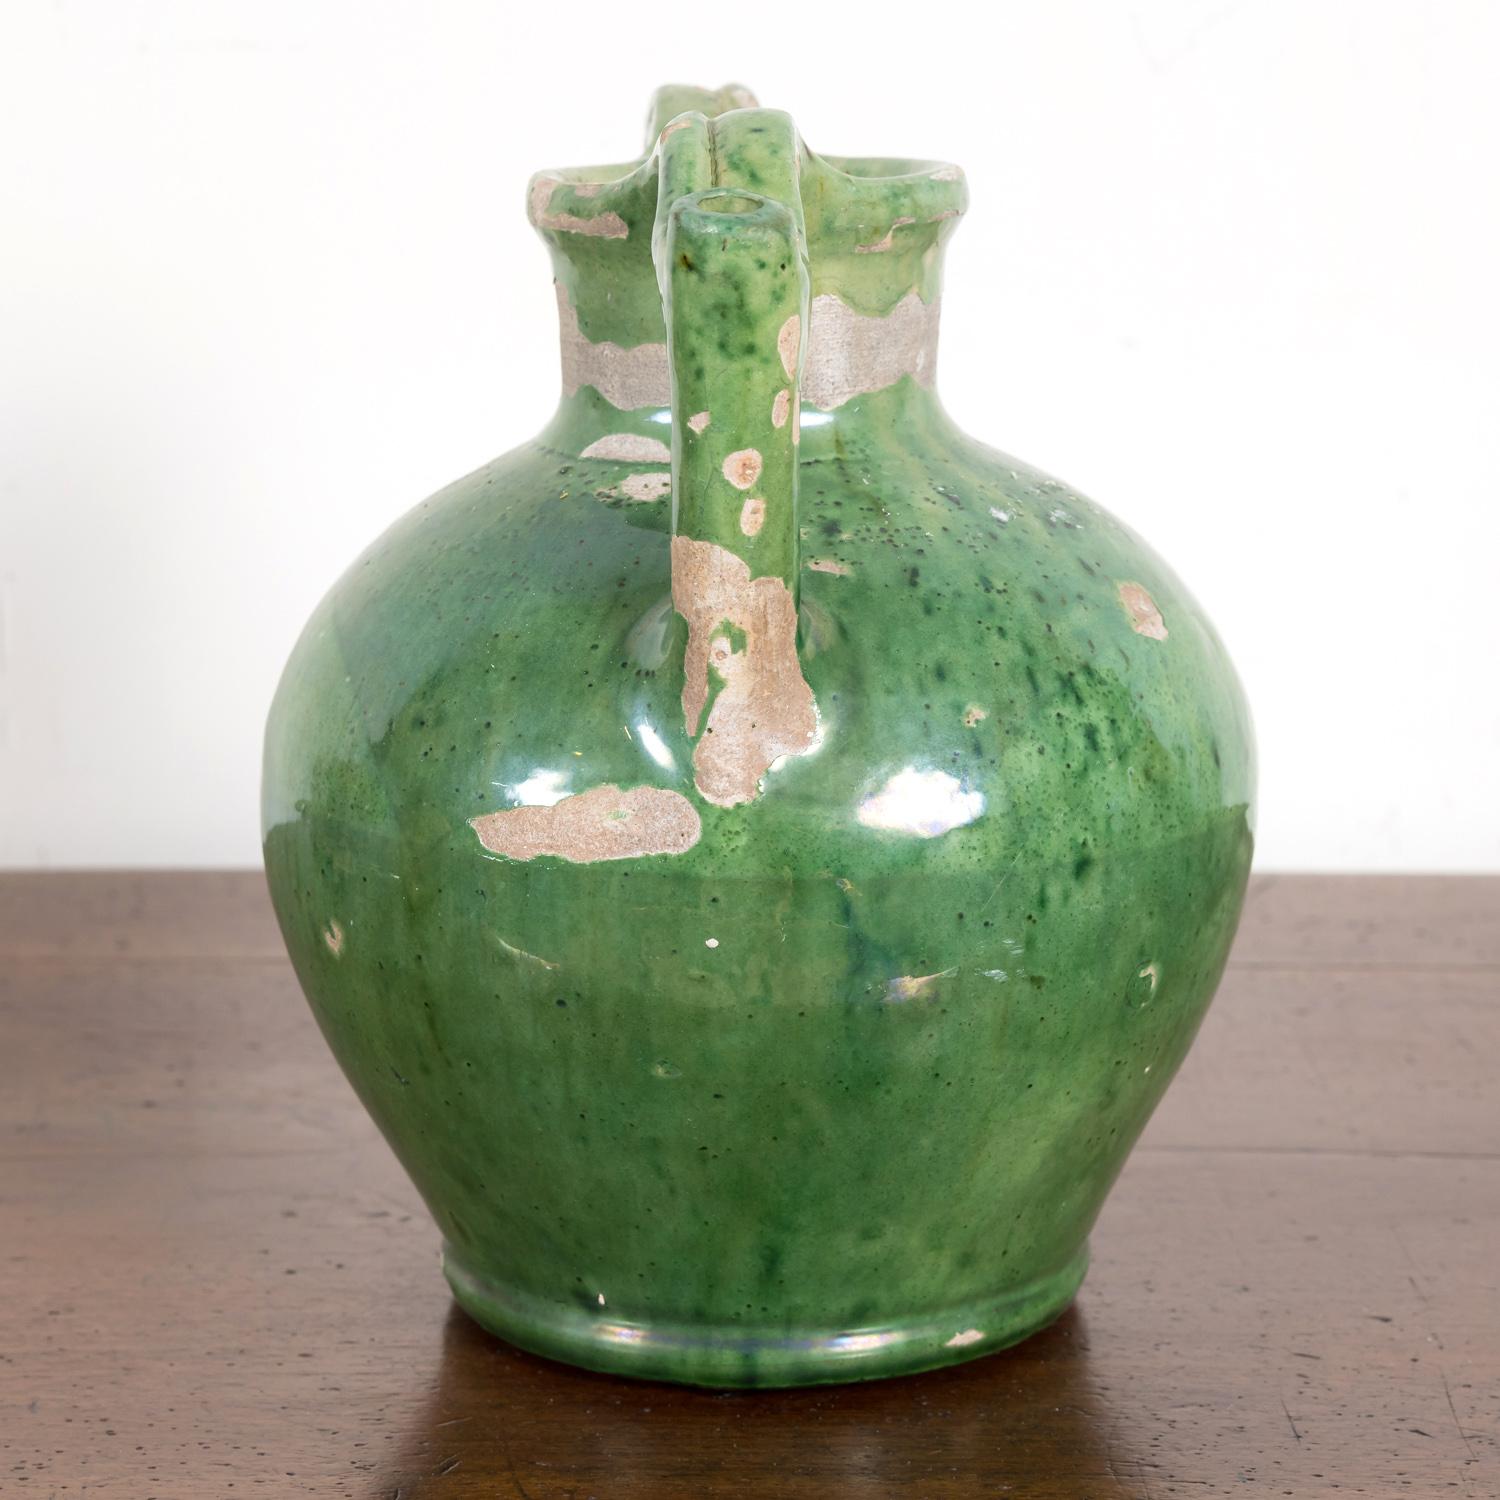 Terracotta Mid-19th Century Antique French Cruche Orjol or Water Jug with Rare Green Glaze 